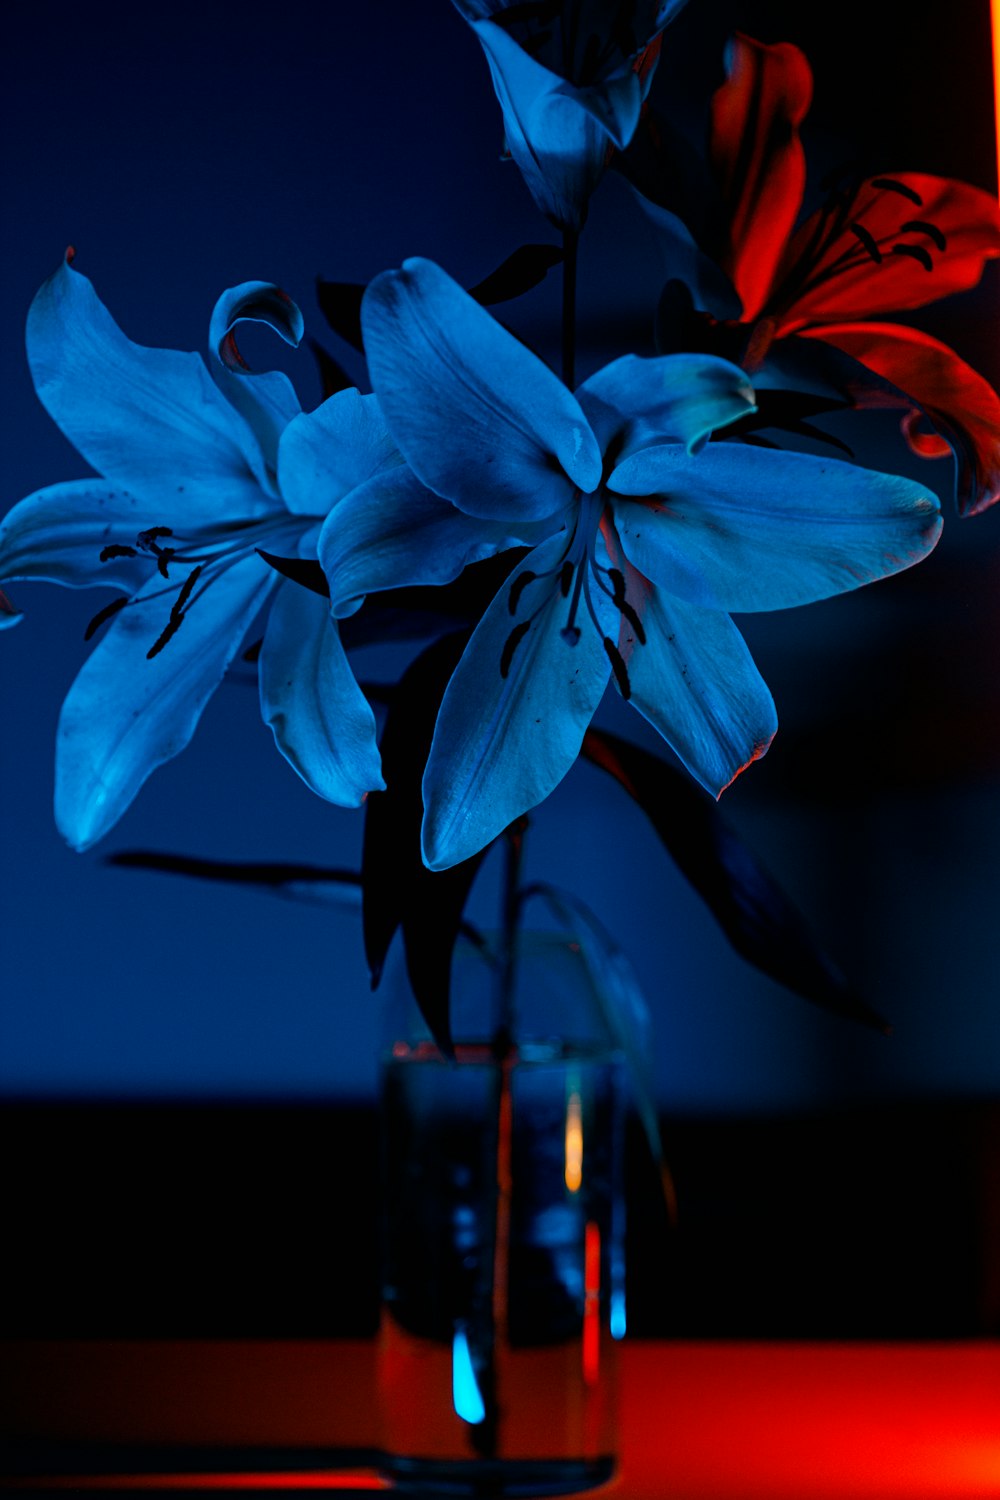 a blue flower in a glass vase on a table